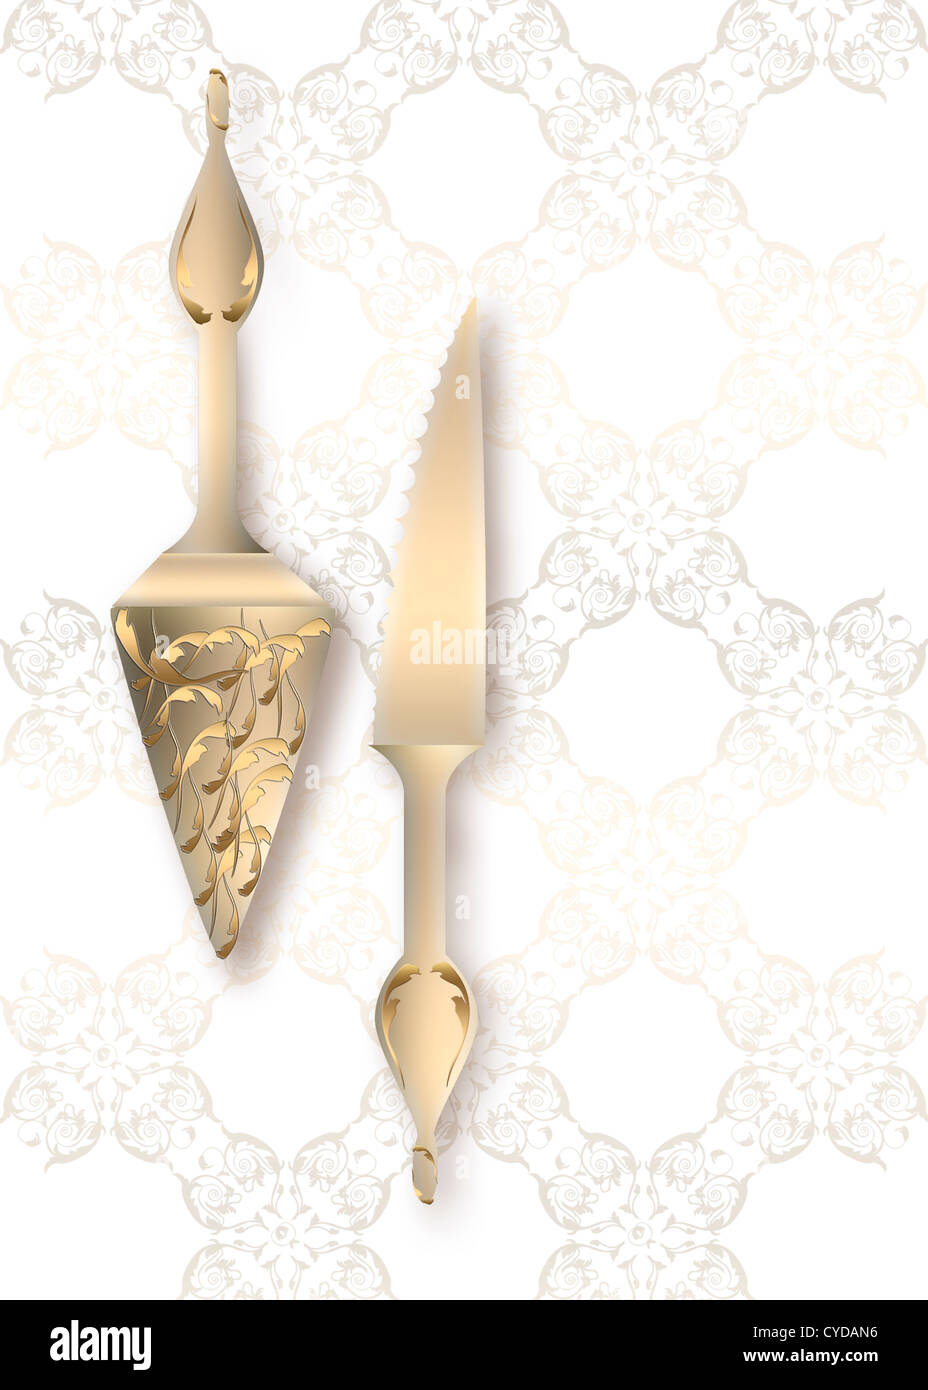 Illustrated Lace and Cake Cutting Utensils Stock Photo